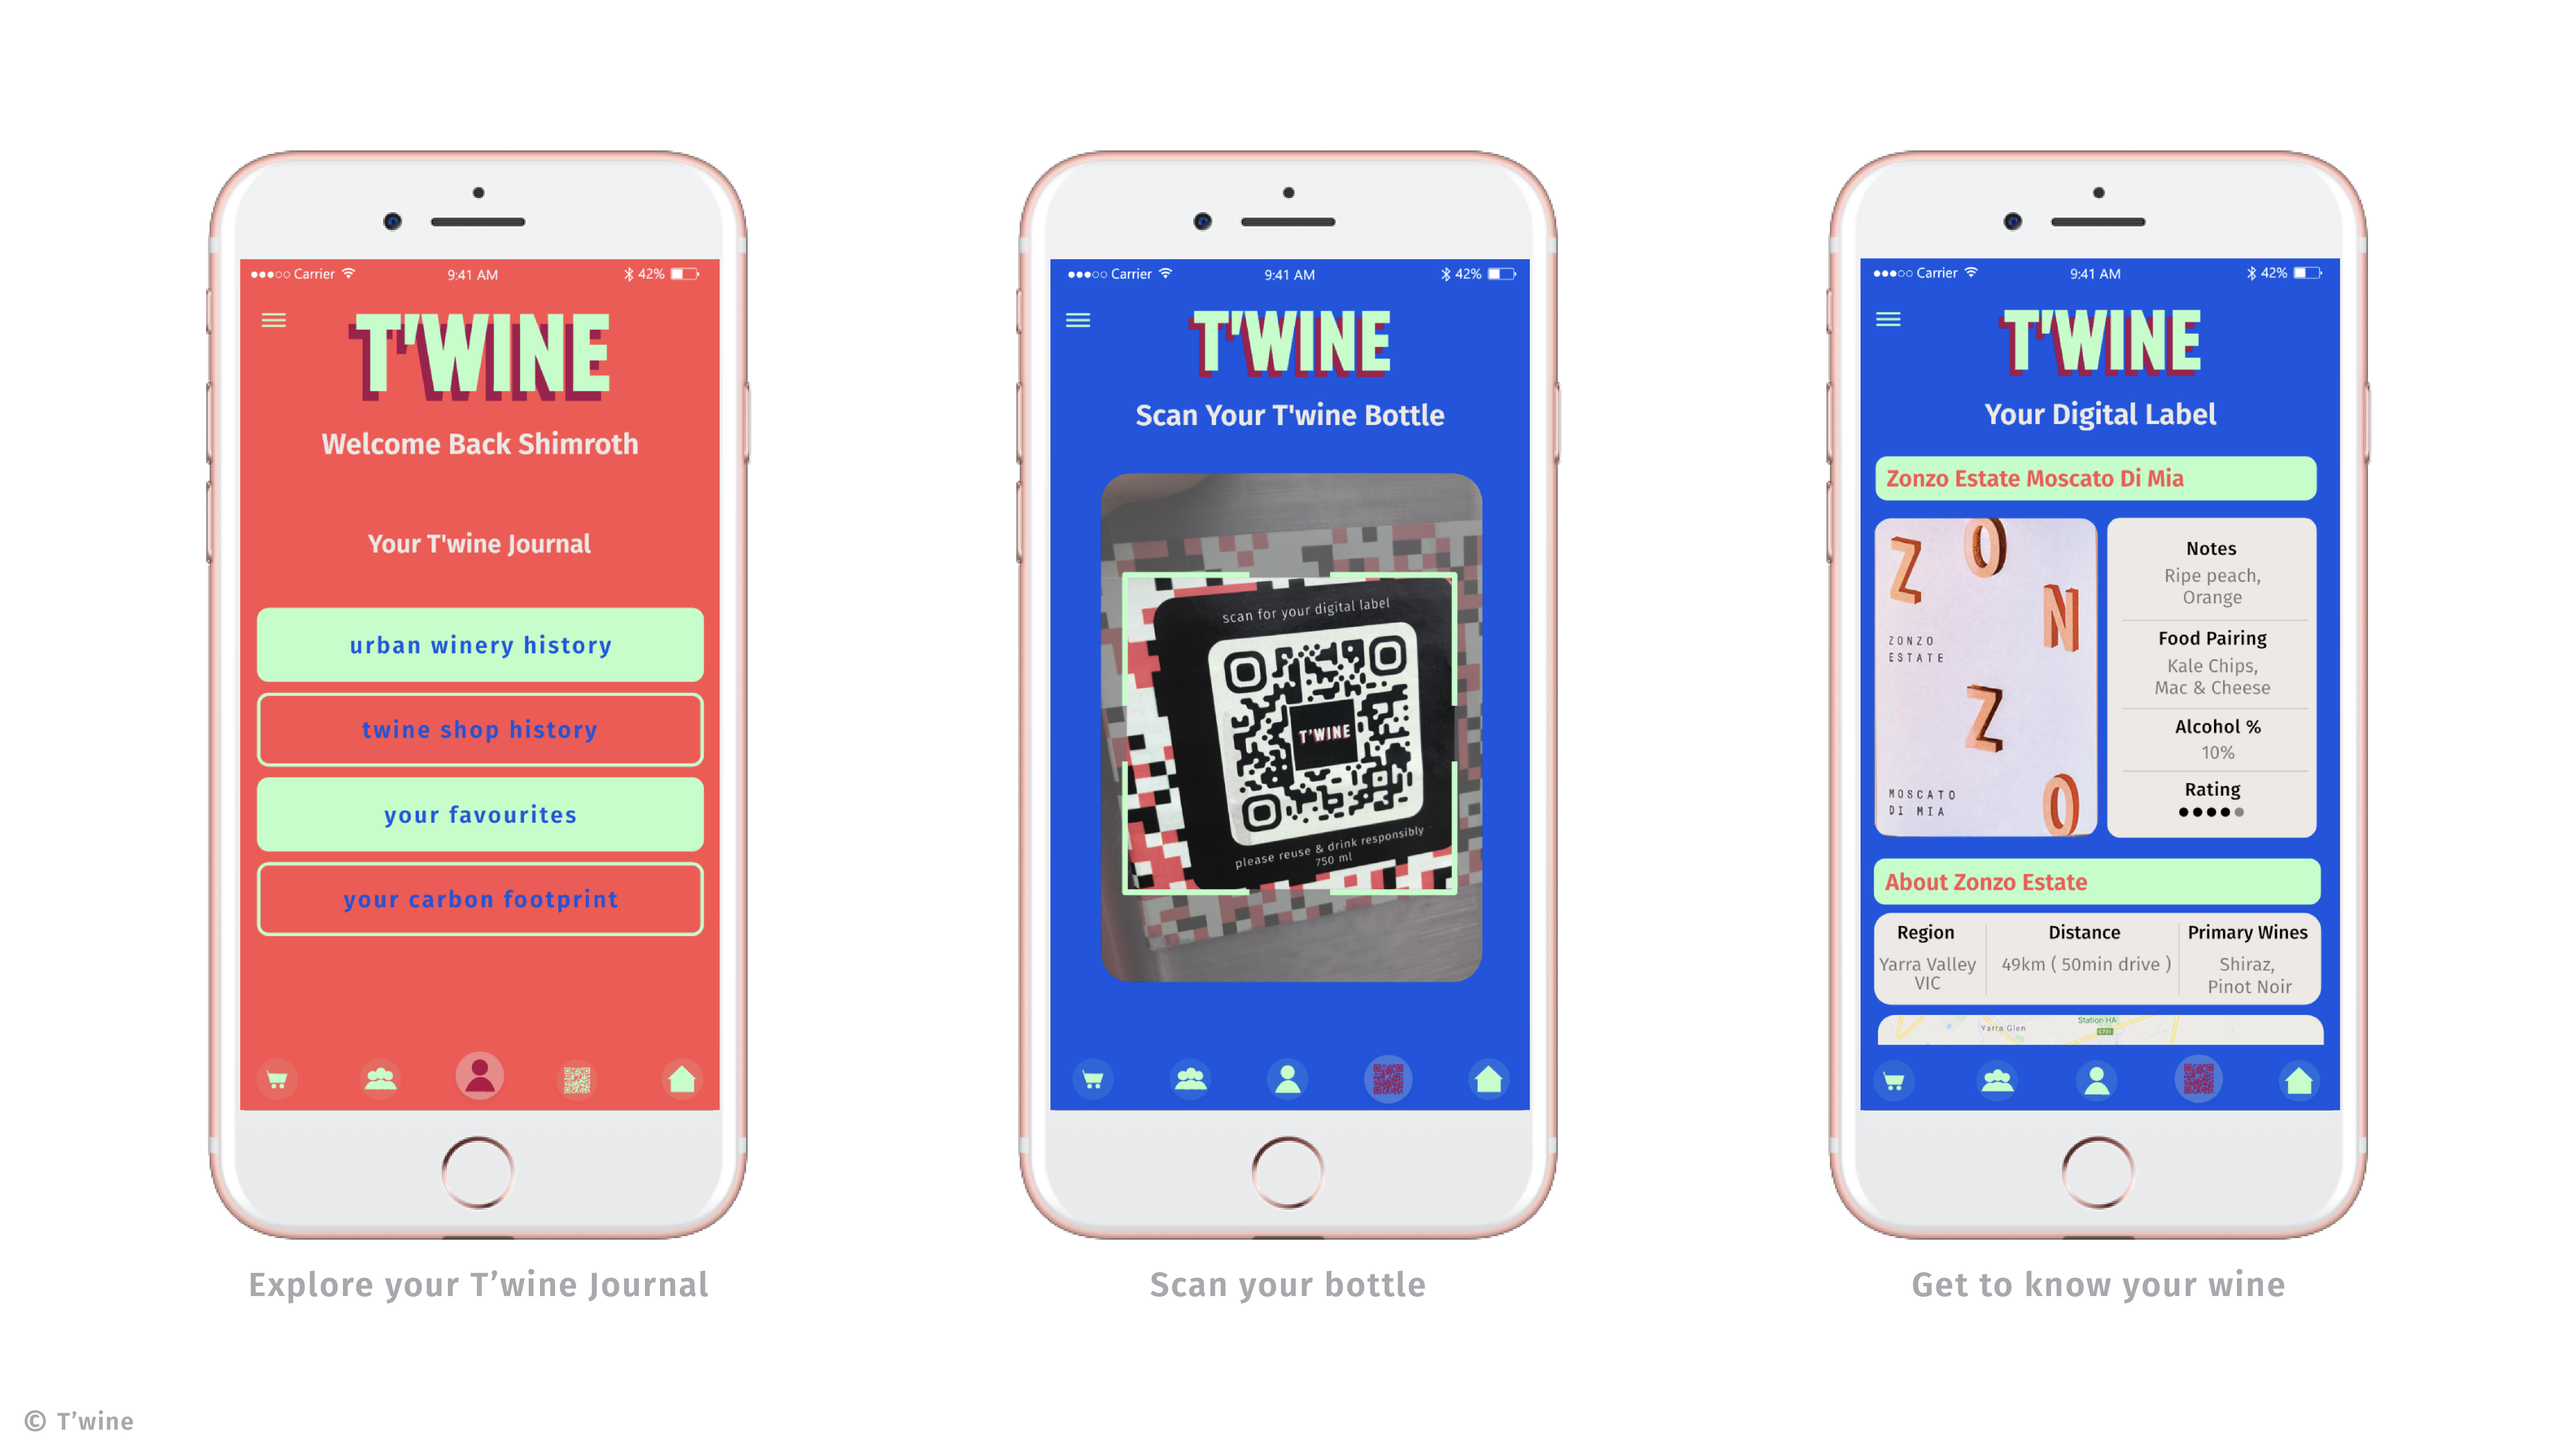 T’Wine app: The app manages purchases and reveals the digital label, which dynamically changes upon refill.